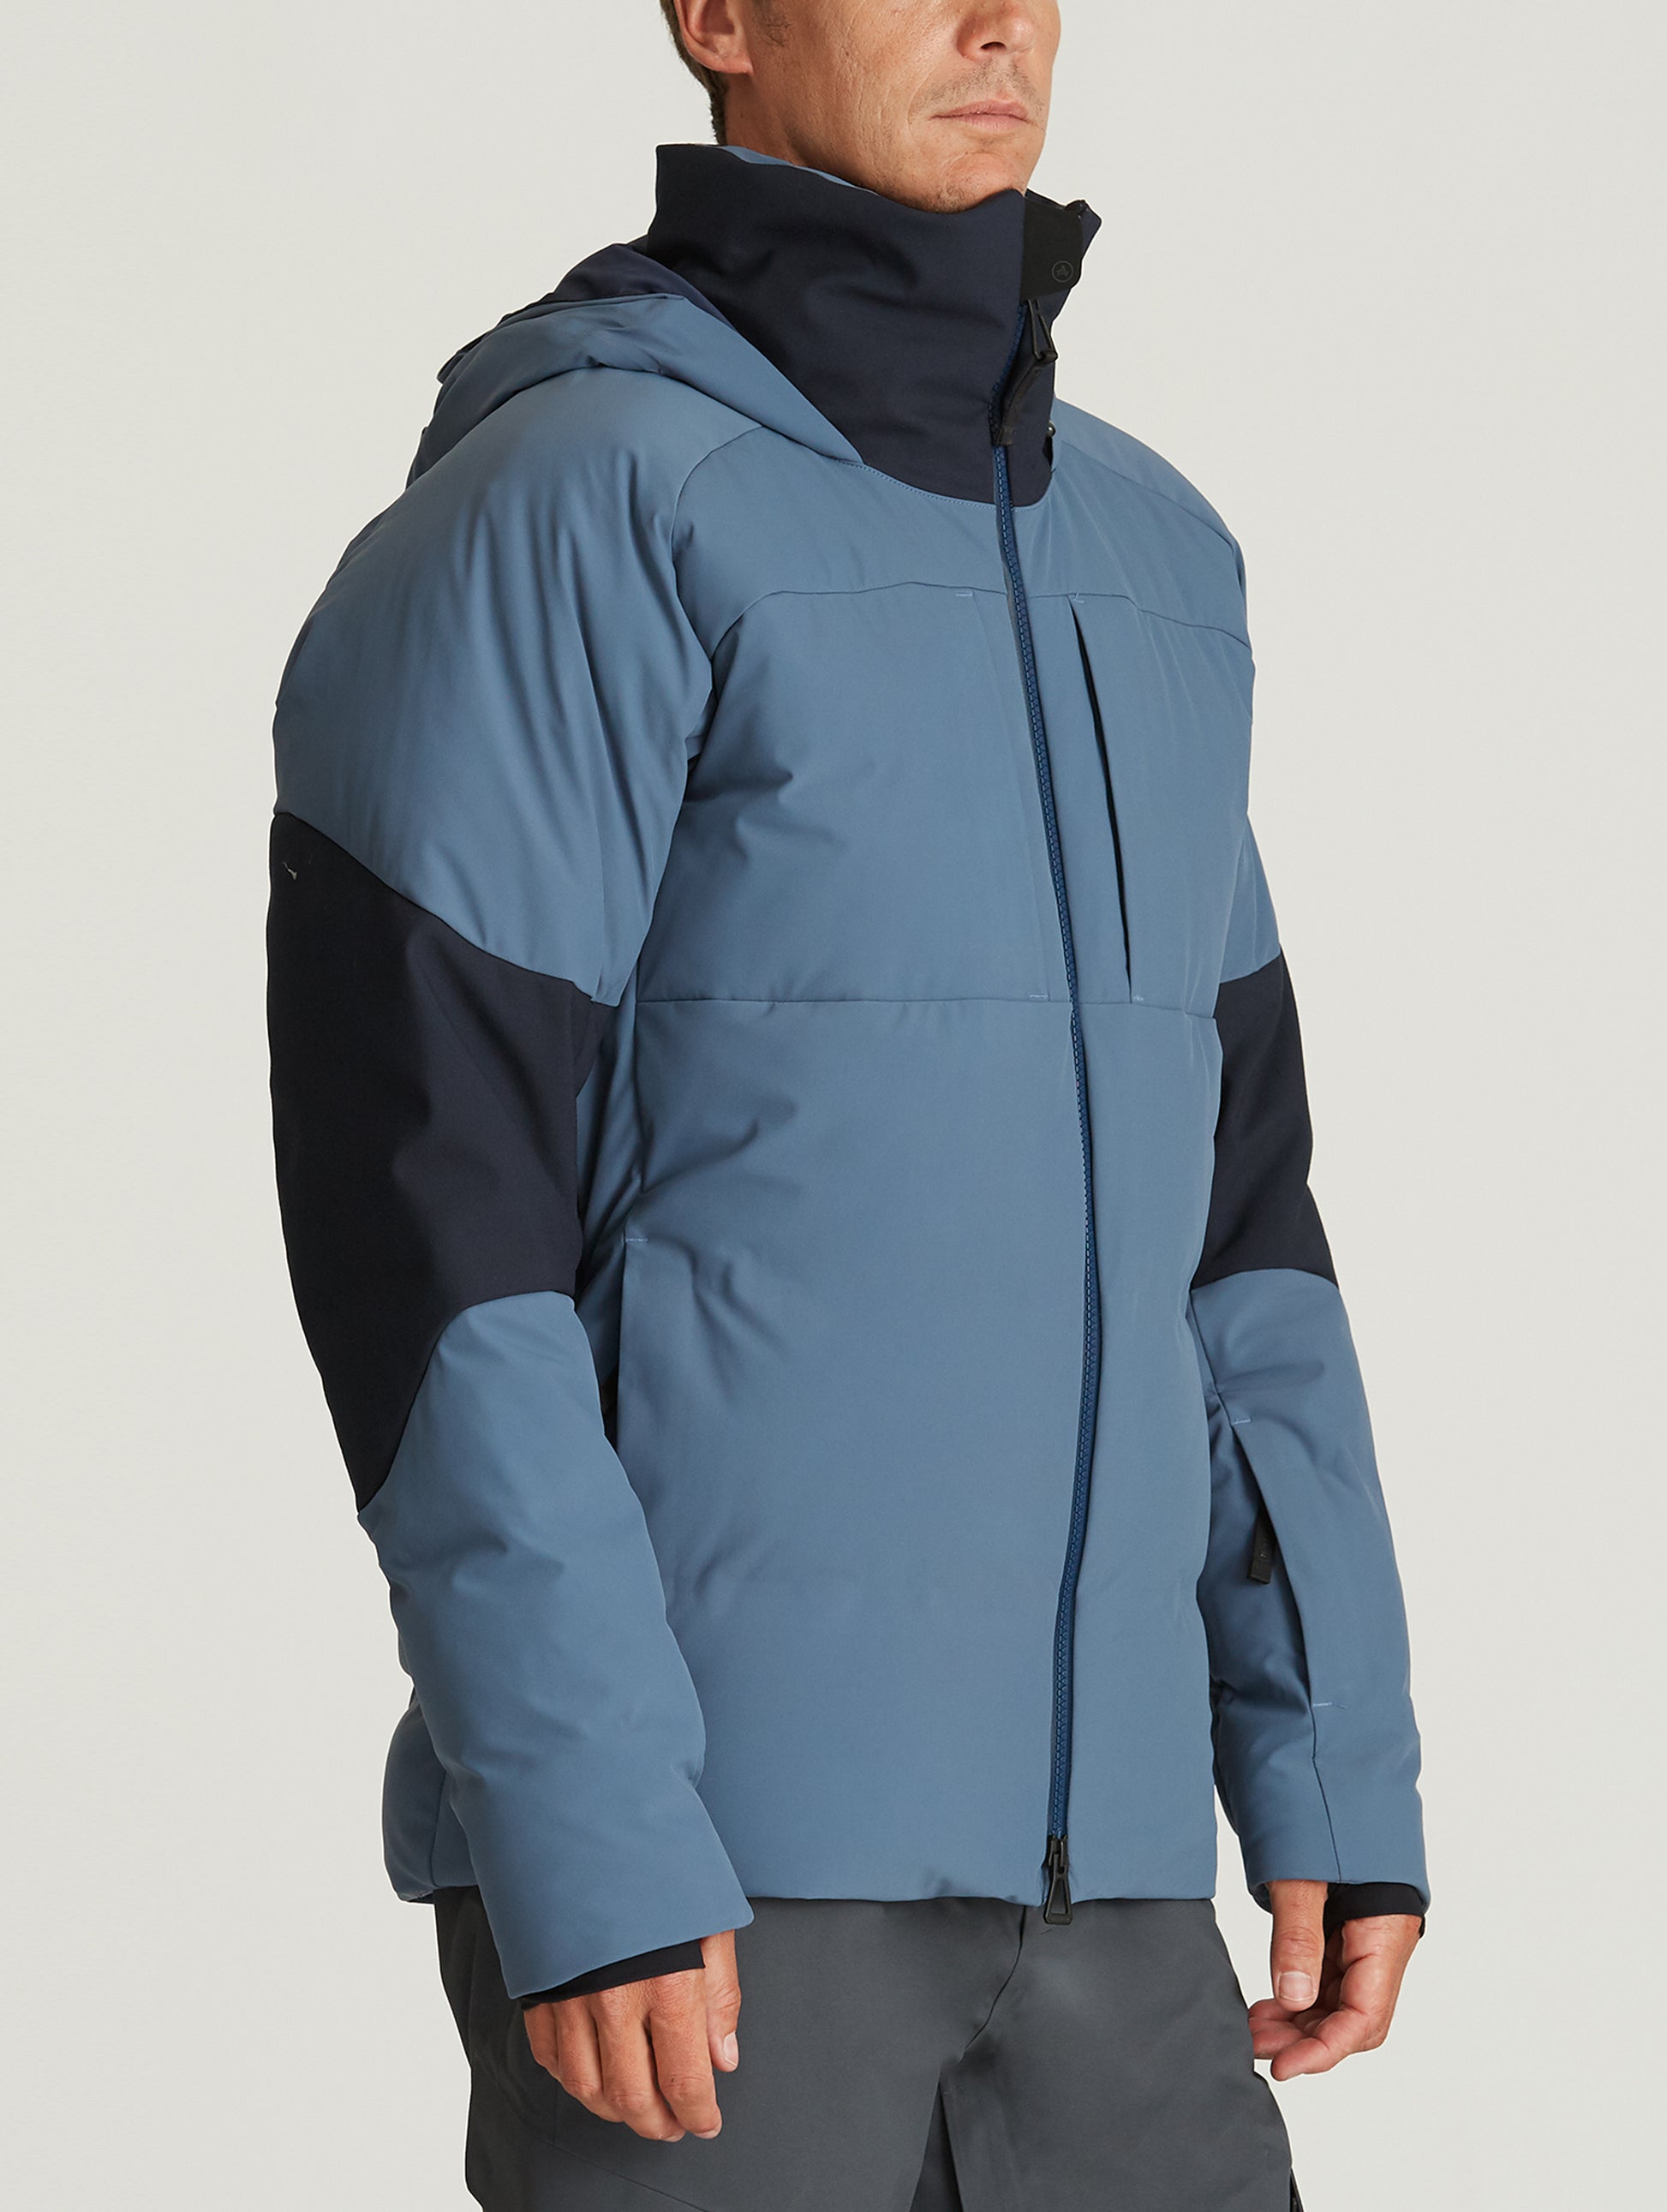 man wearing blue ski jacket from Aether Apparel